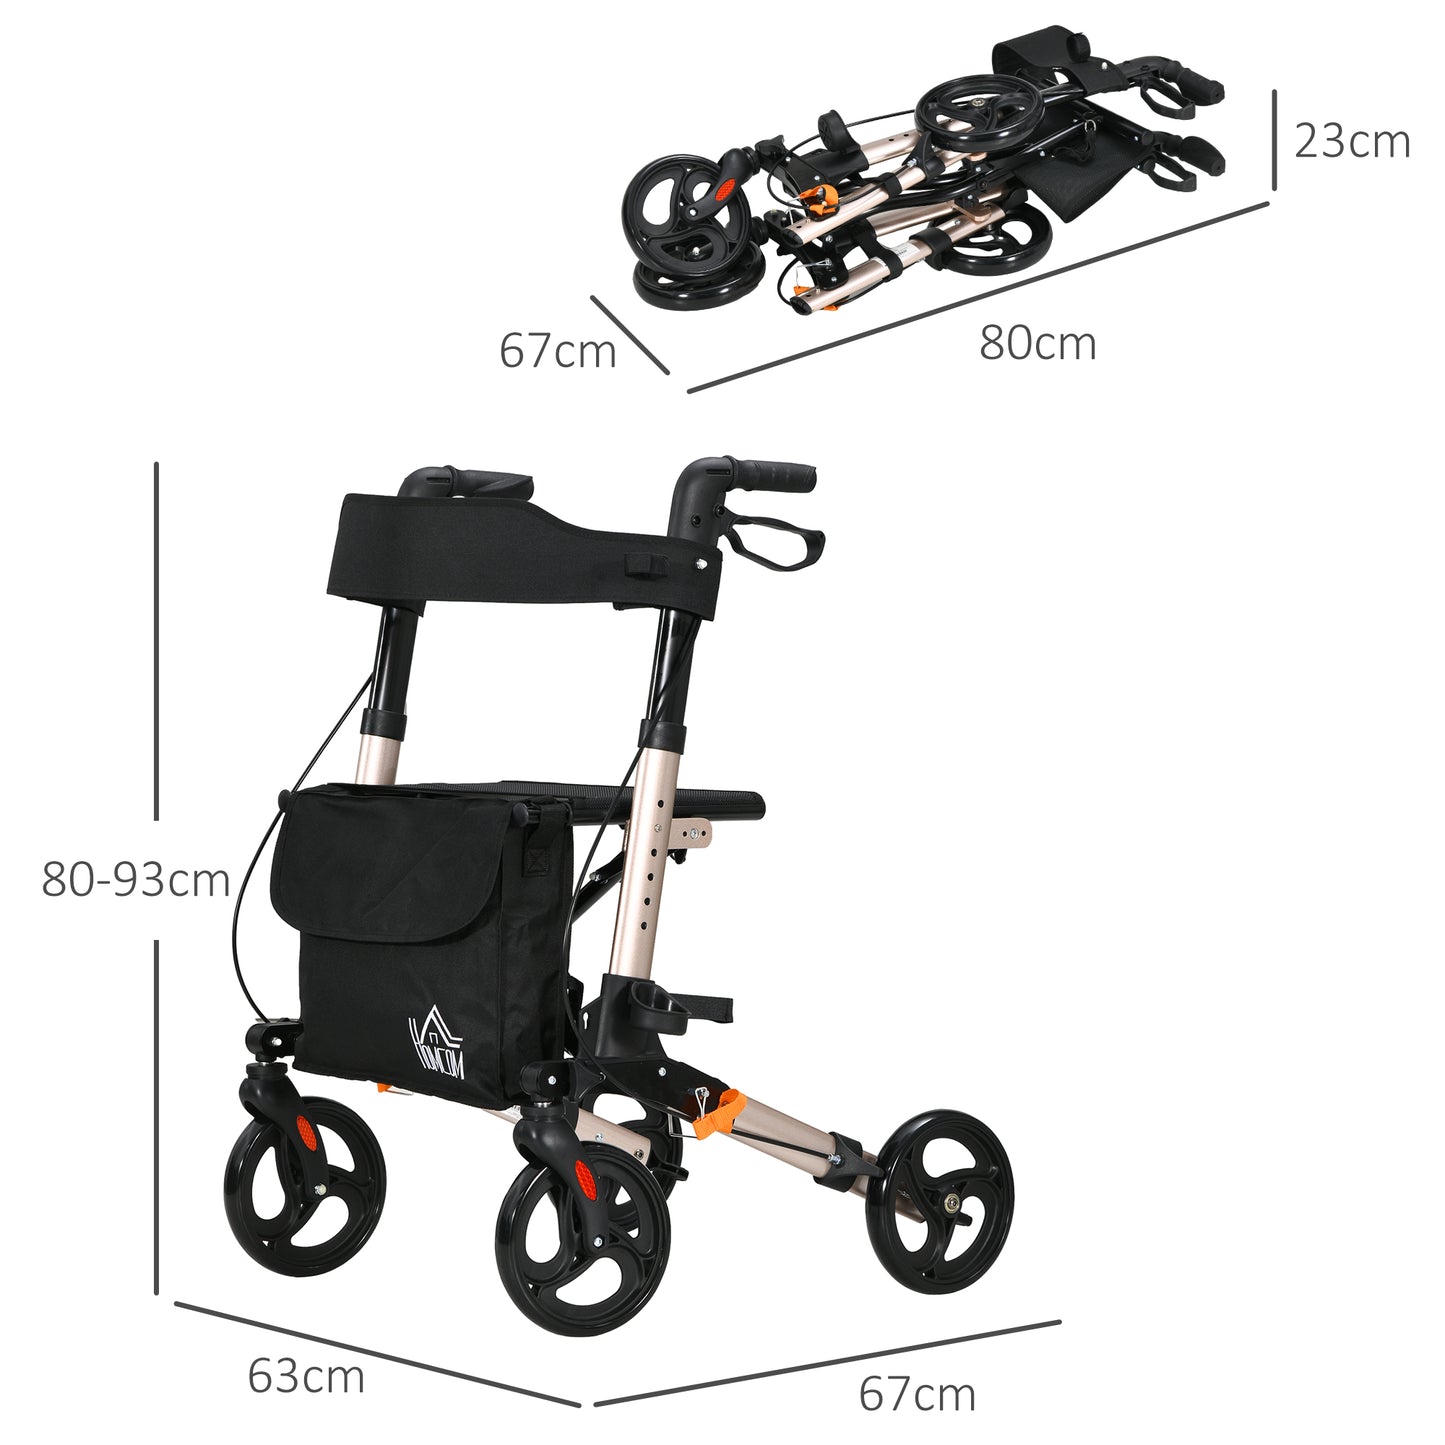 HOMCOM 4 Wheel Rollator with Seat and Back, Folding Mobility Walker with Carry Bag, Adjustable Height, Dual Brakes, Cane Holder, Lightweight Aluminium Walking Frame for Seniors and Disabled, Gold Tone